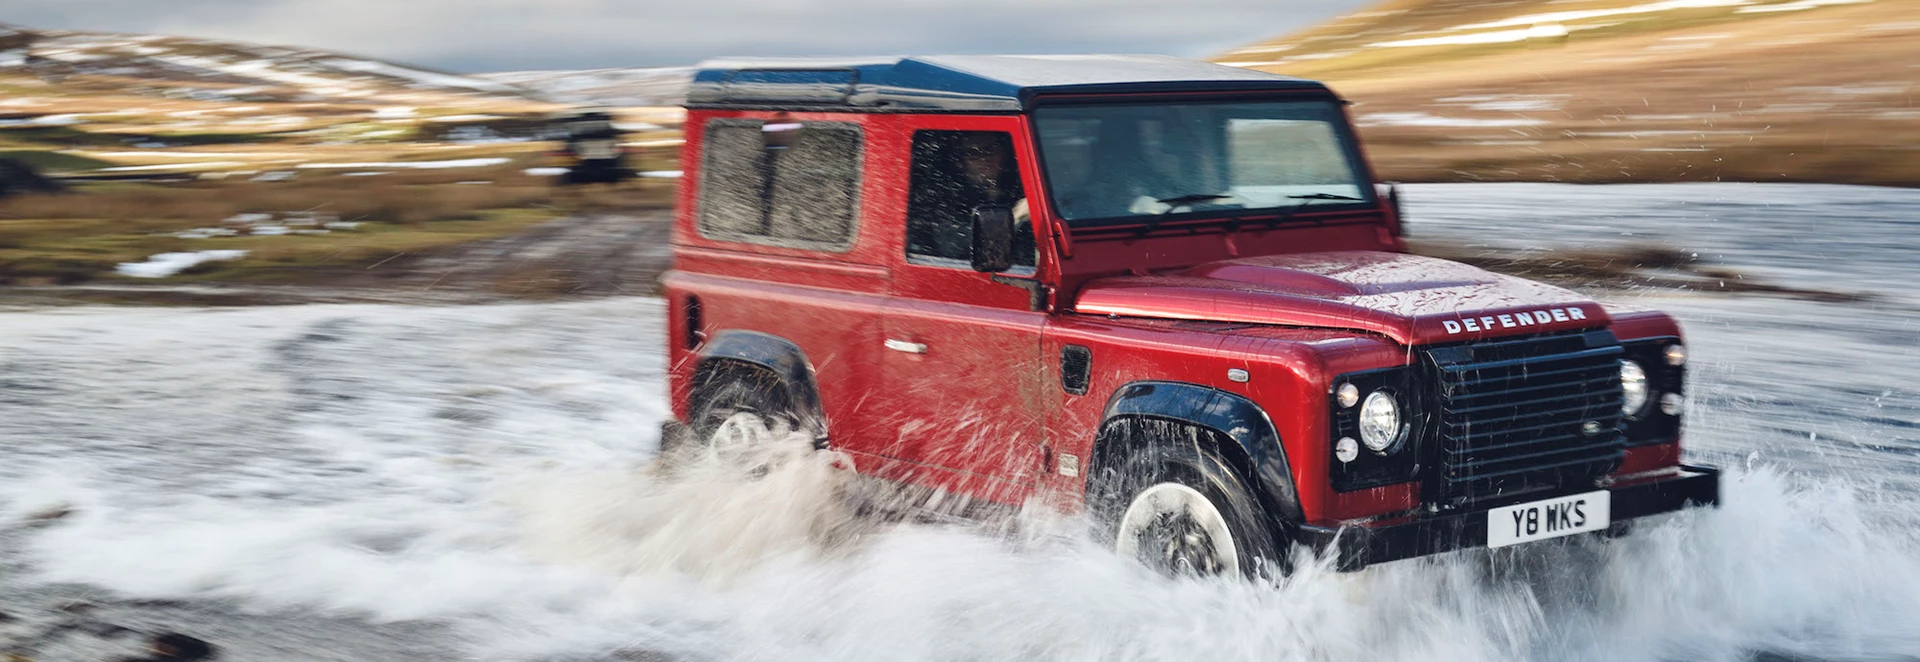 Limited-edition V8 Land Rover Defender officially launched